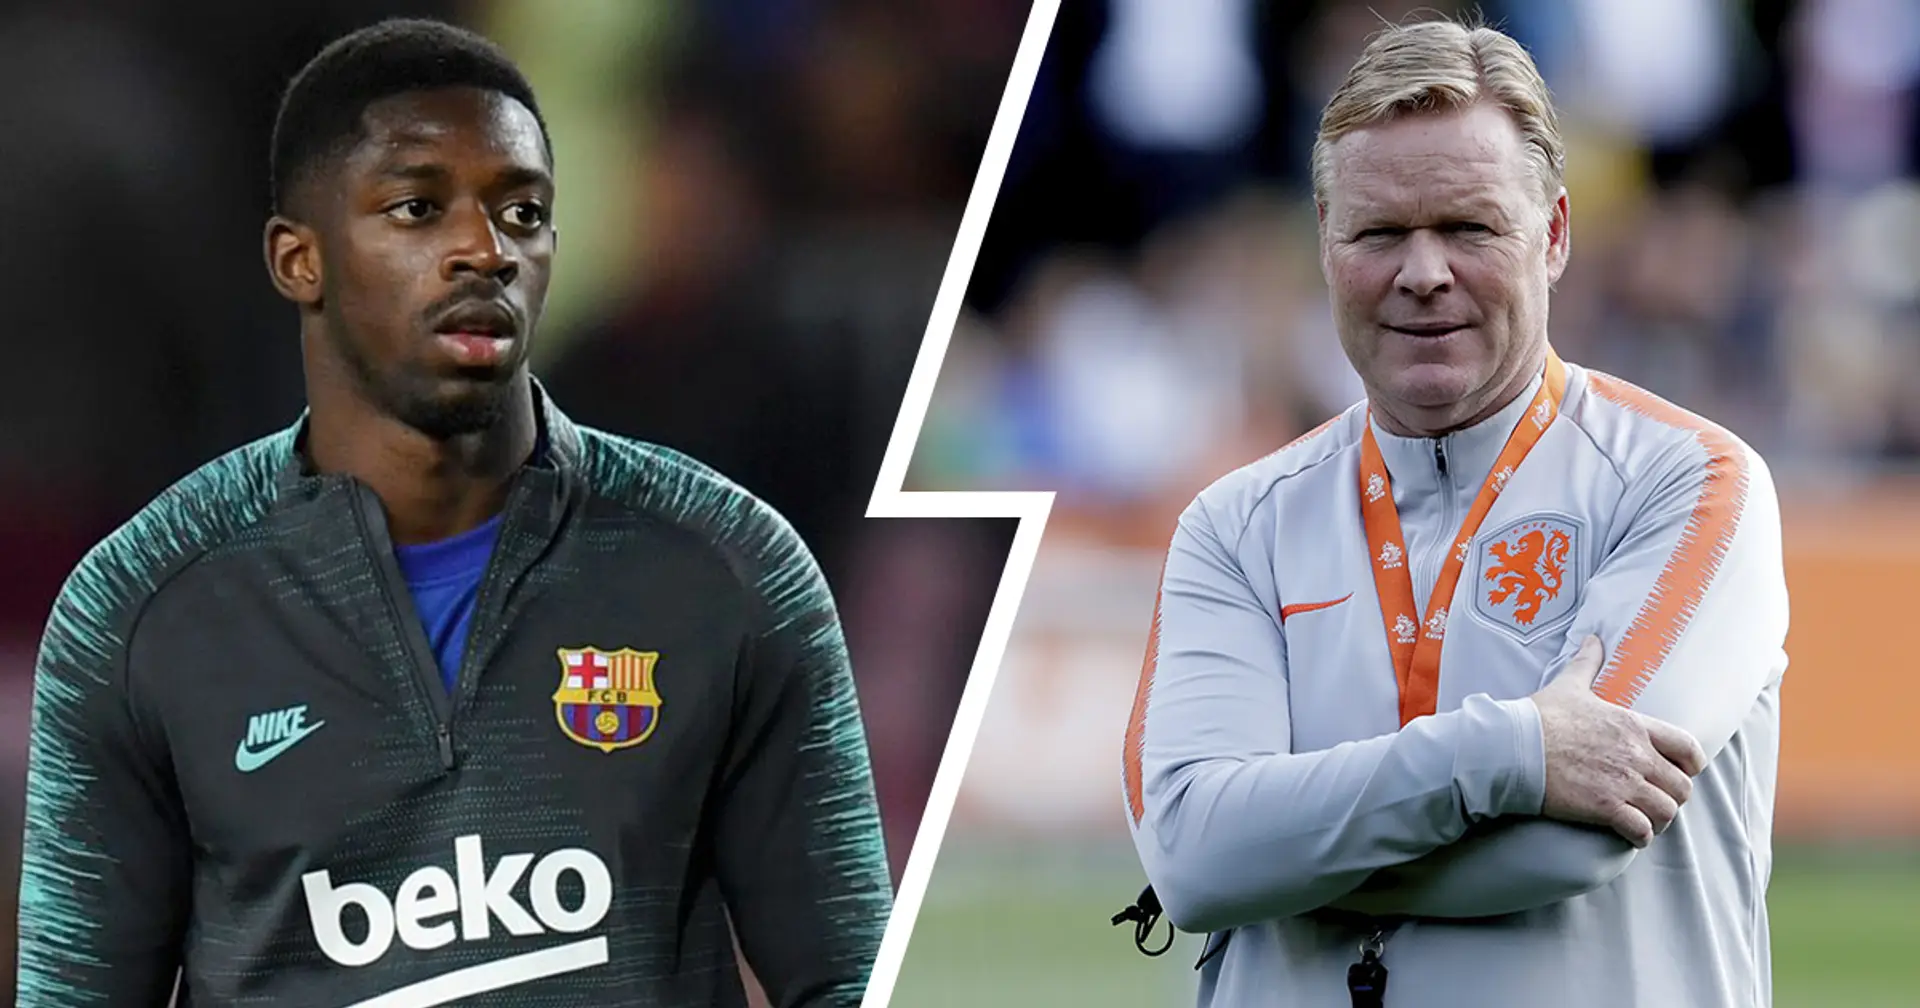 Koeman's impact subs and 3 more reasons why 5-sub rule could benefit Barca in 2020/21